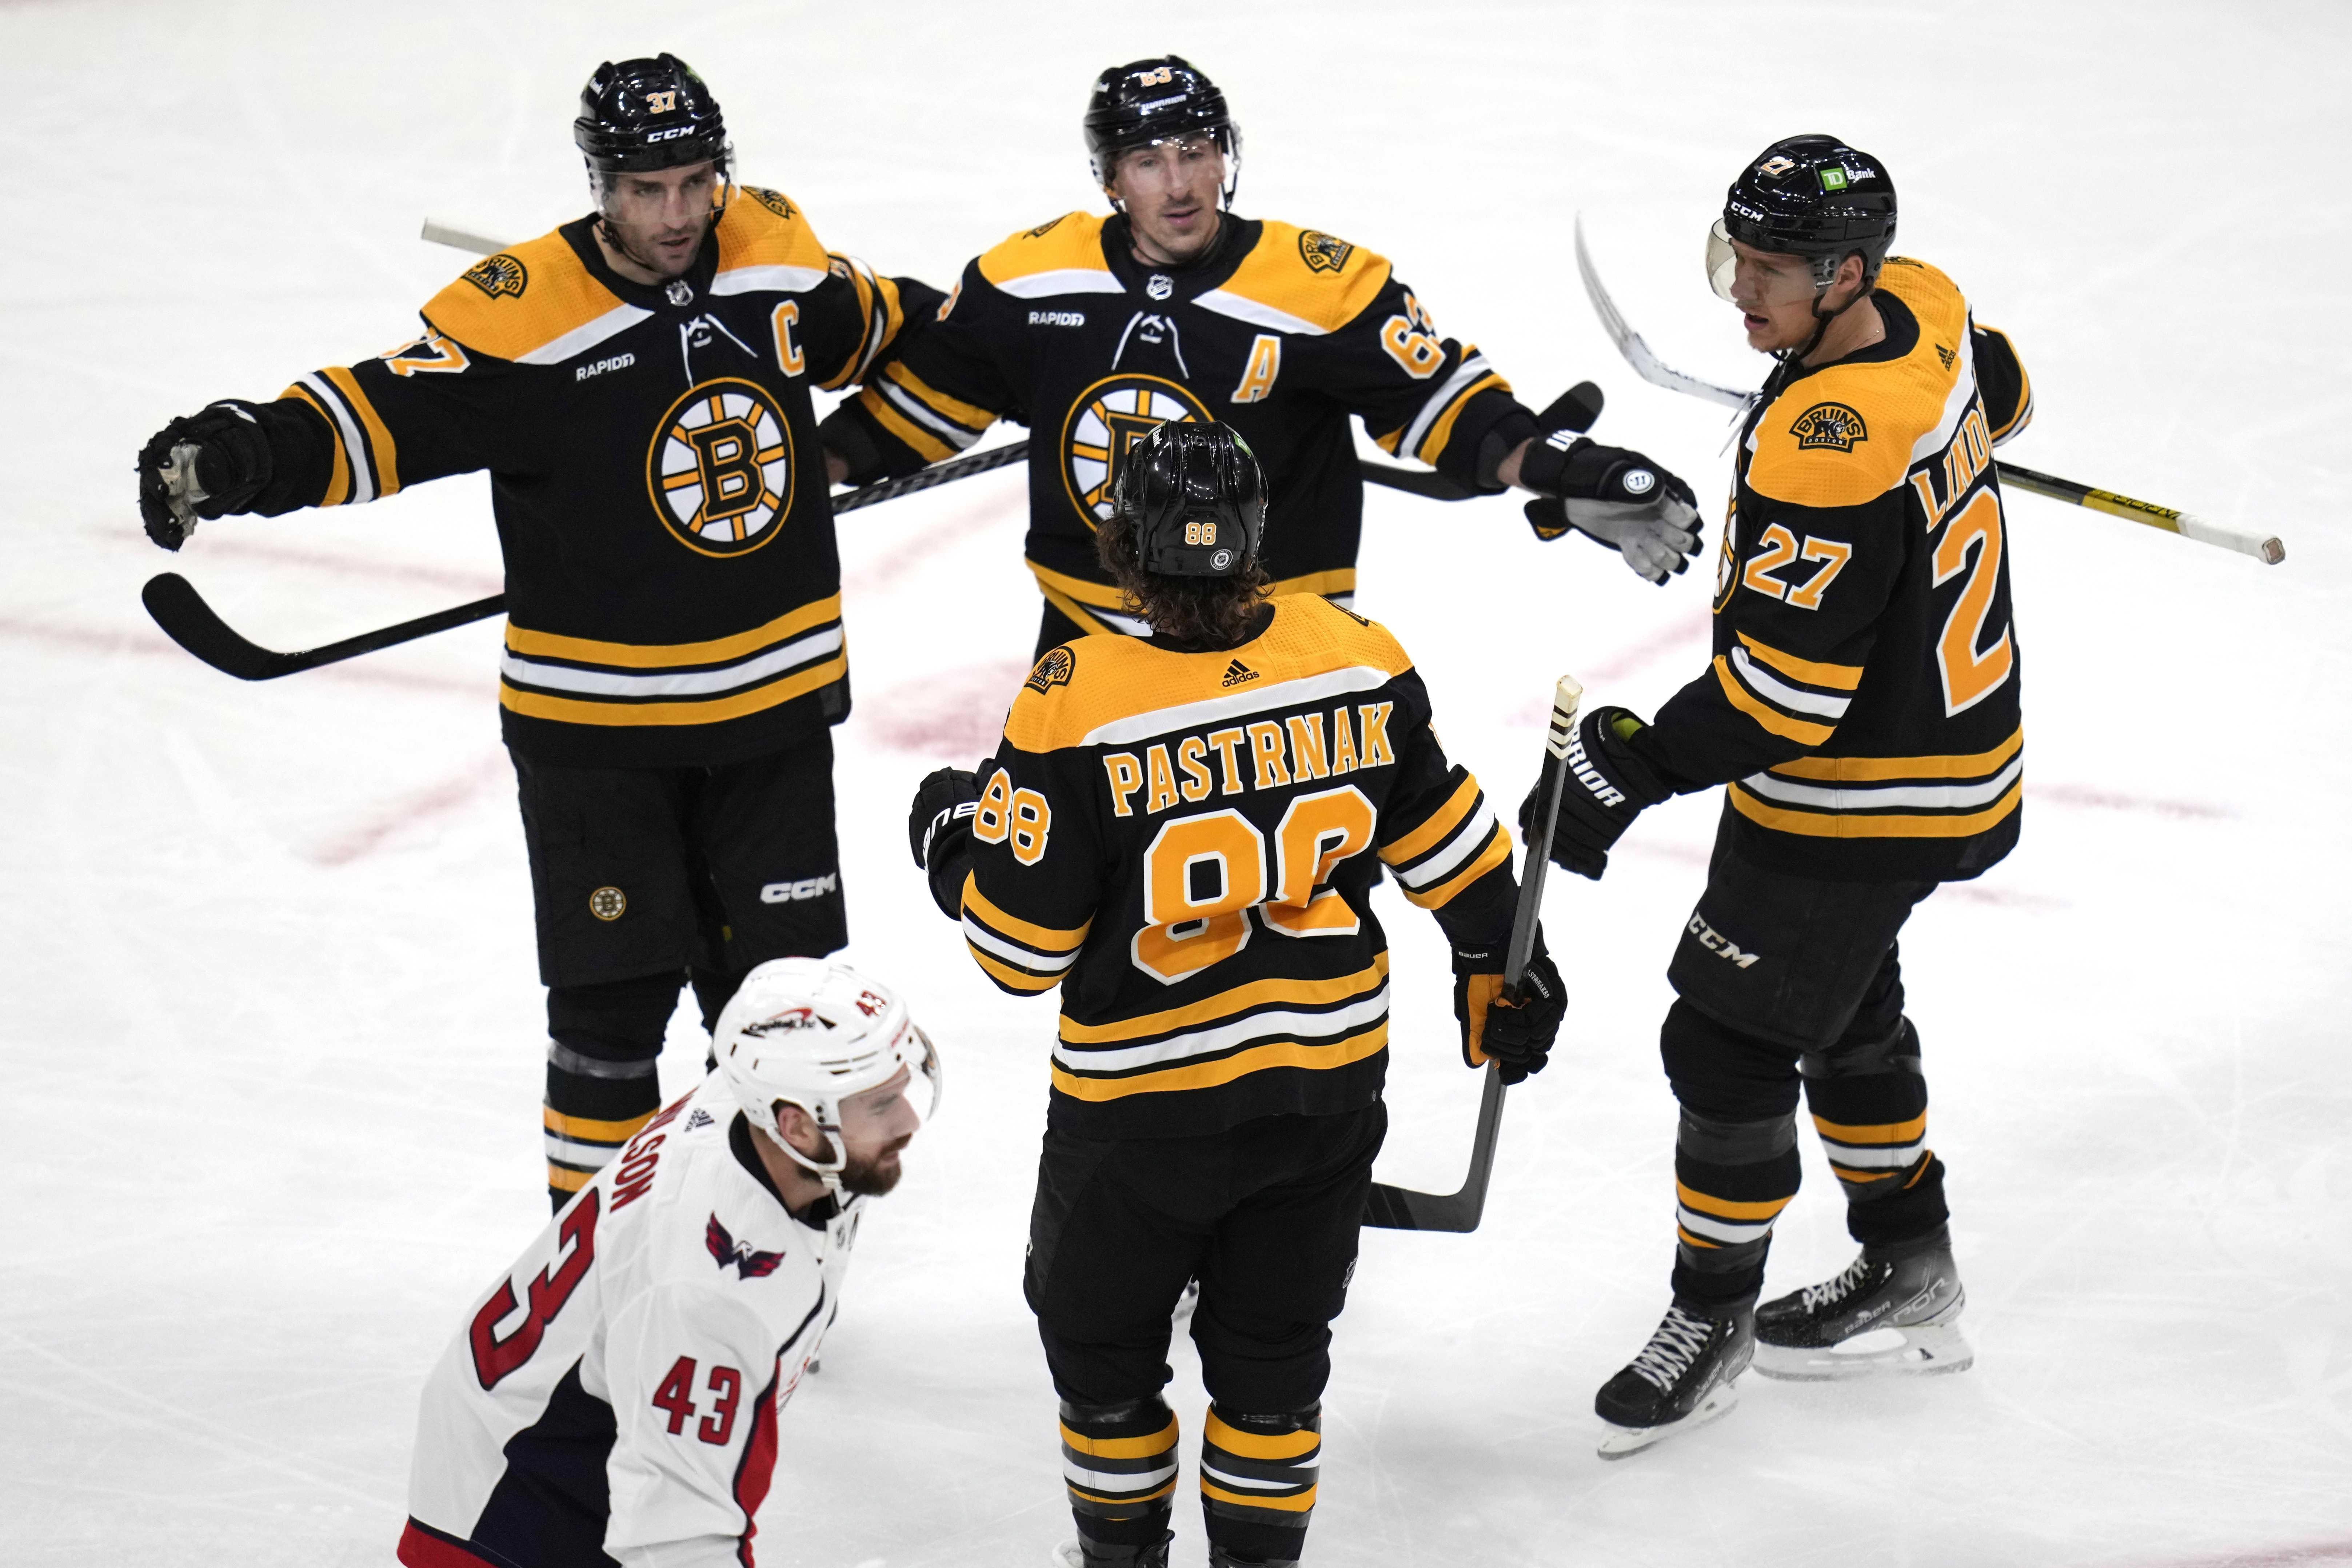 Boston Bruins set NHL all-time points record with 5-2 victory over the Washington Capitals